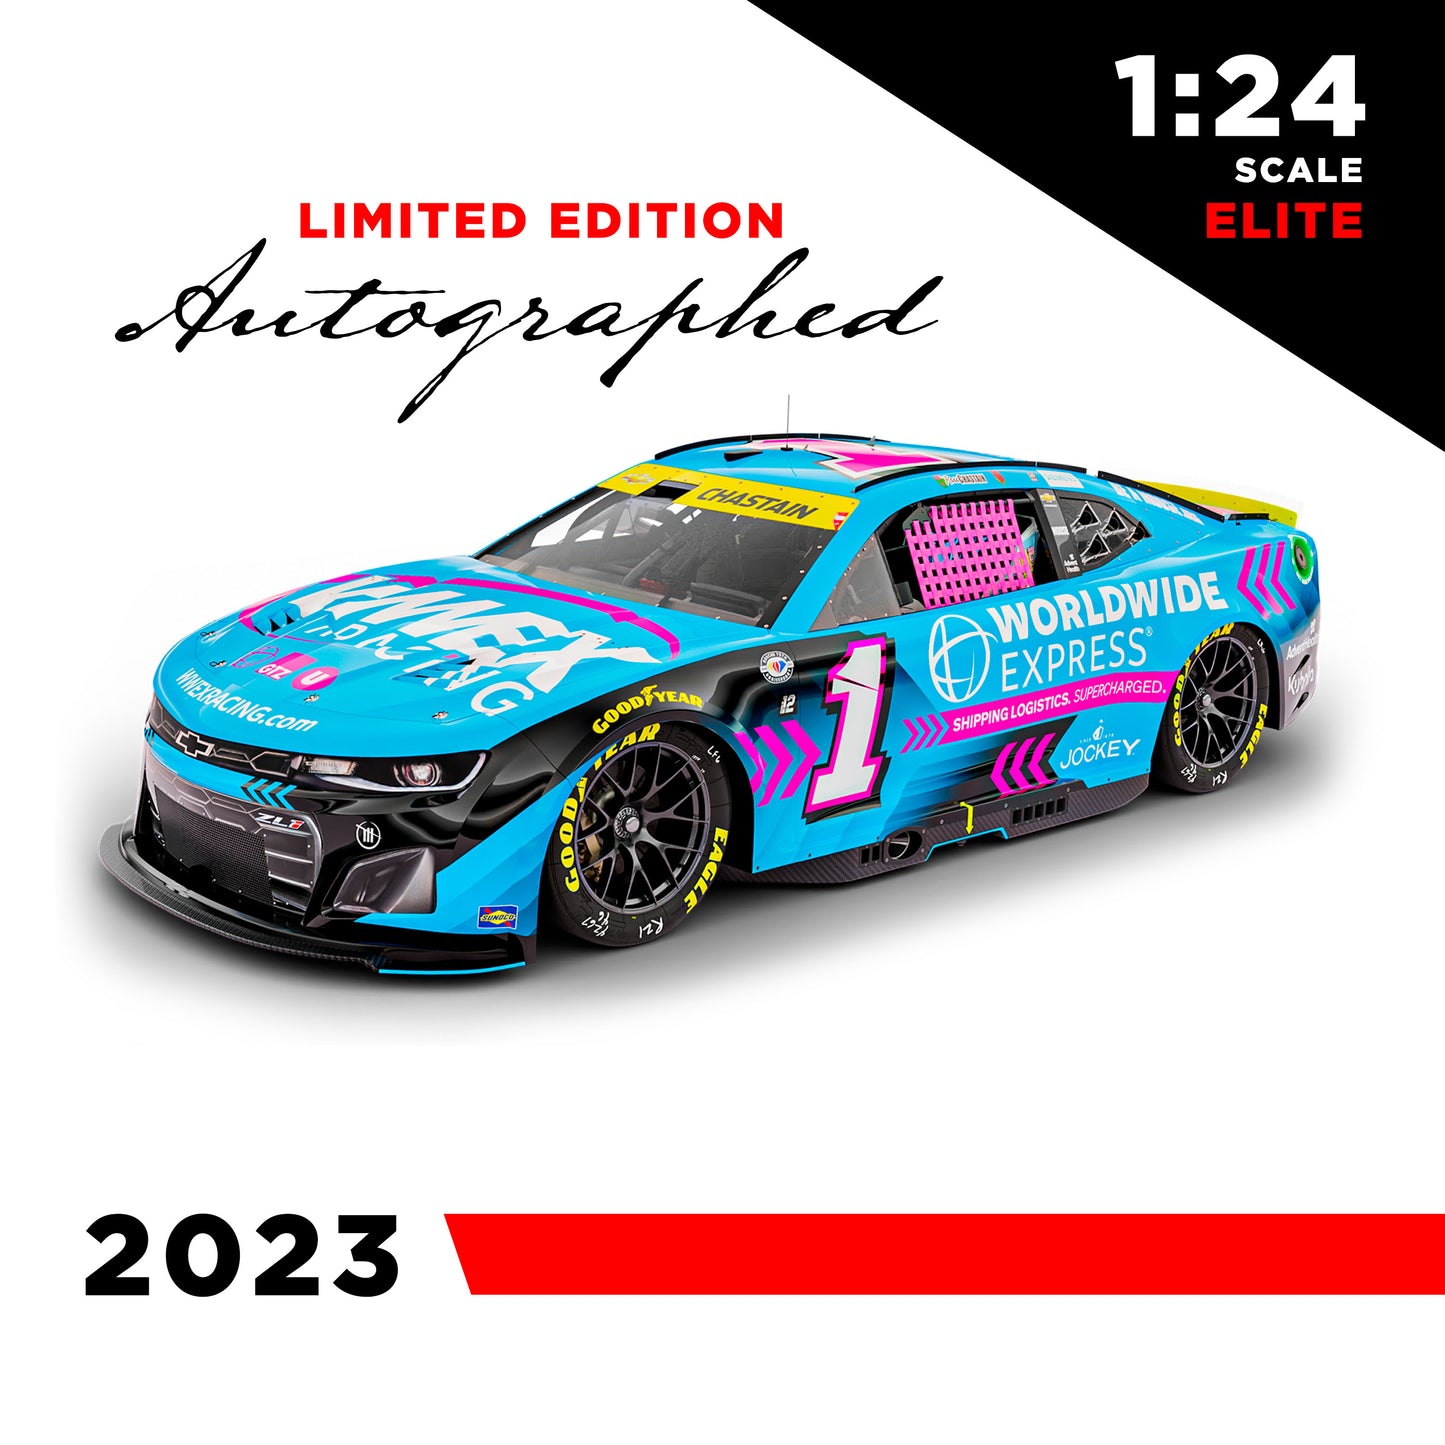 AUTOGRAPHED Ross Chastain #1 2023 1:24 ELITE WORLDWIDE EXPRESS PINK DIE-CAST